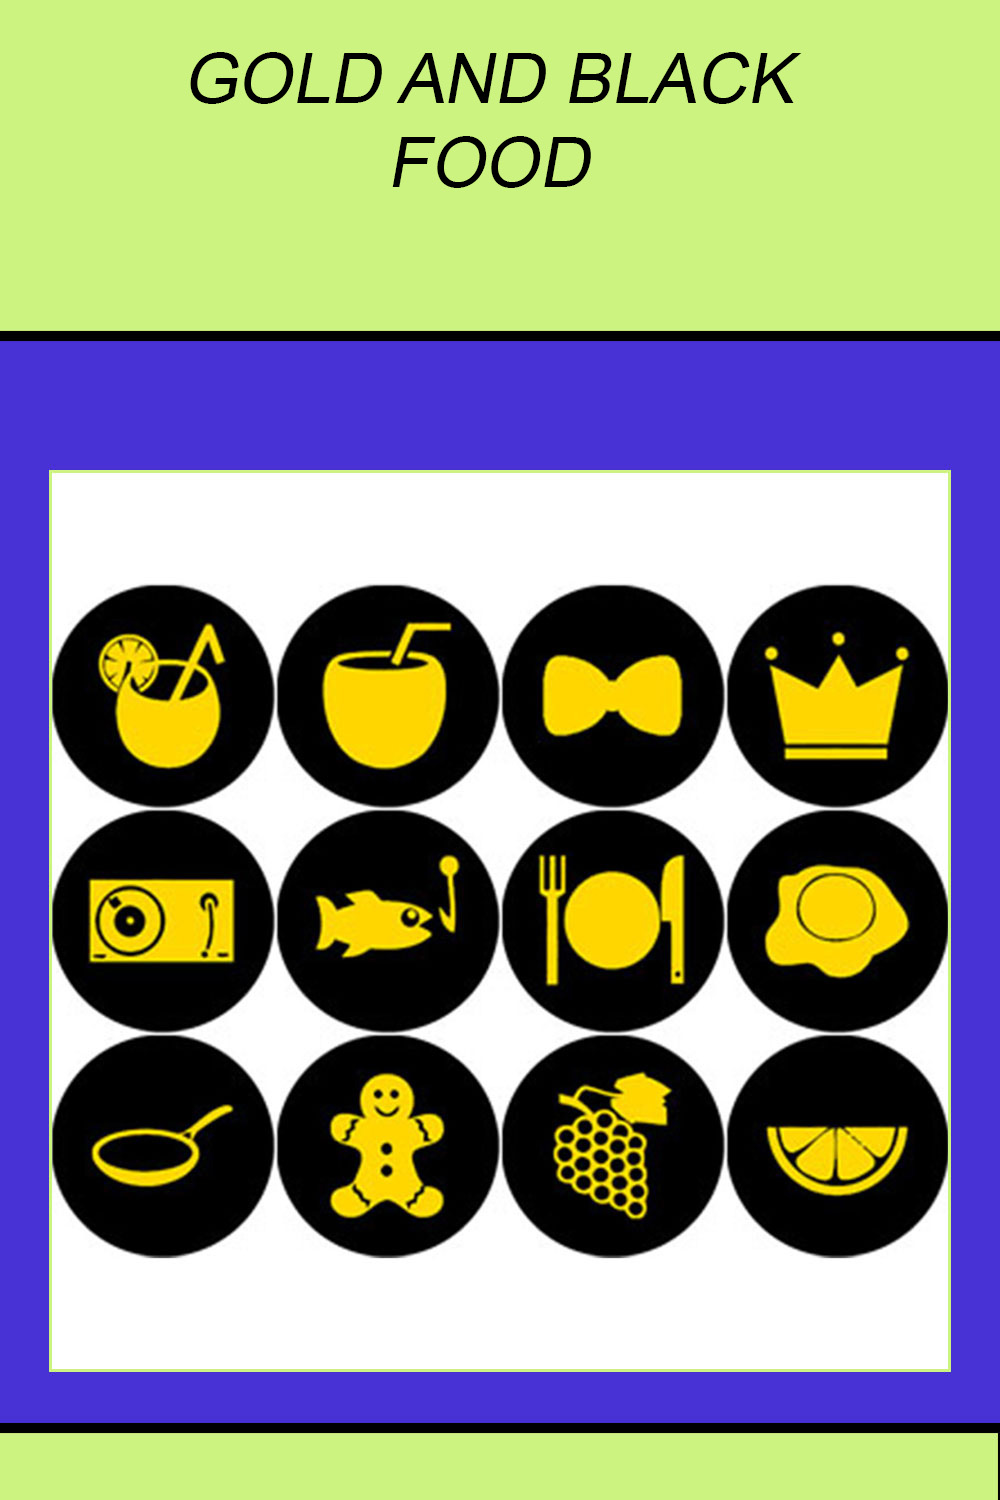 GOLD AND BLACK FOOD ROUND ICONS pinterest preview image.